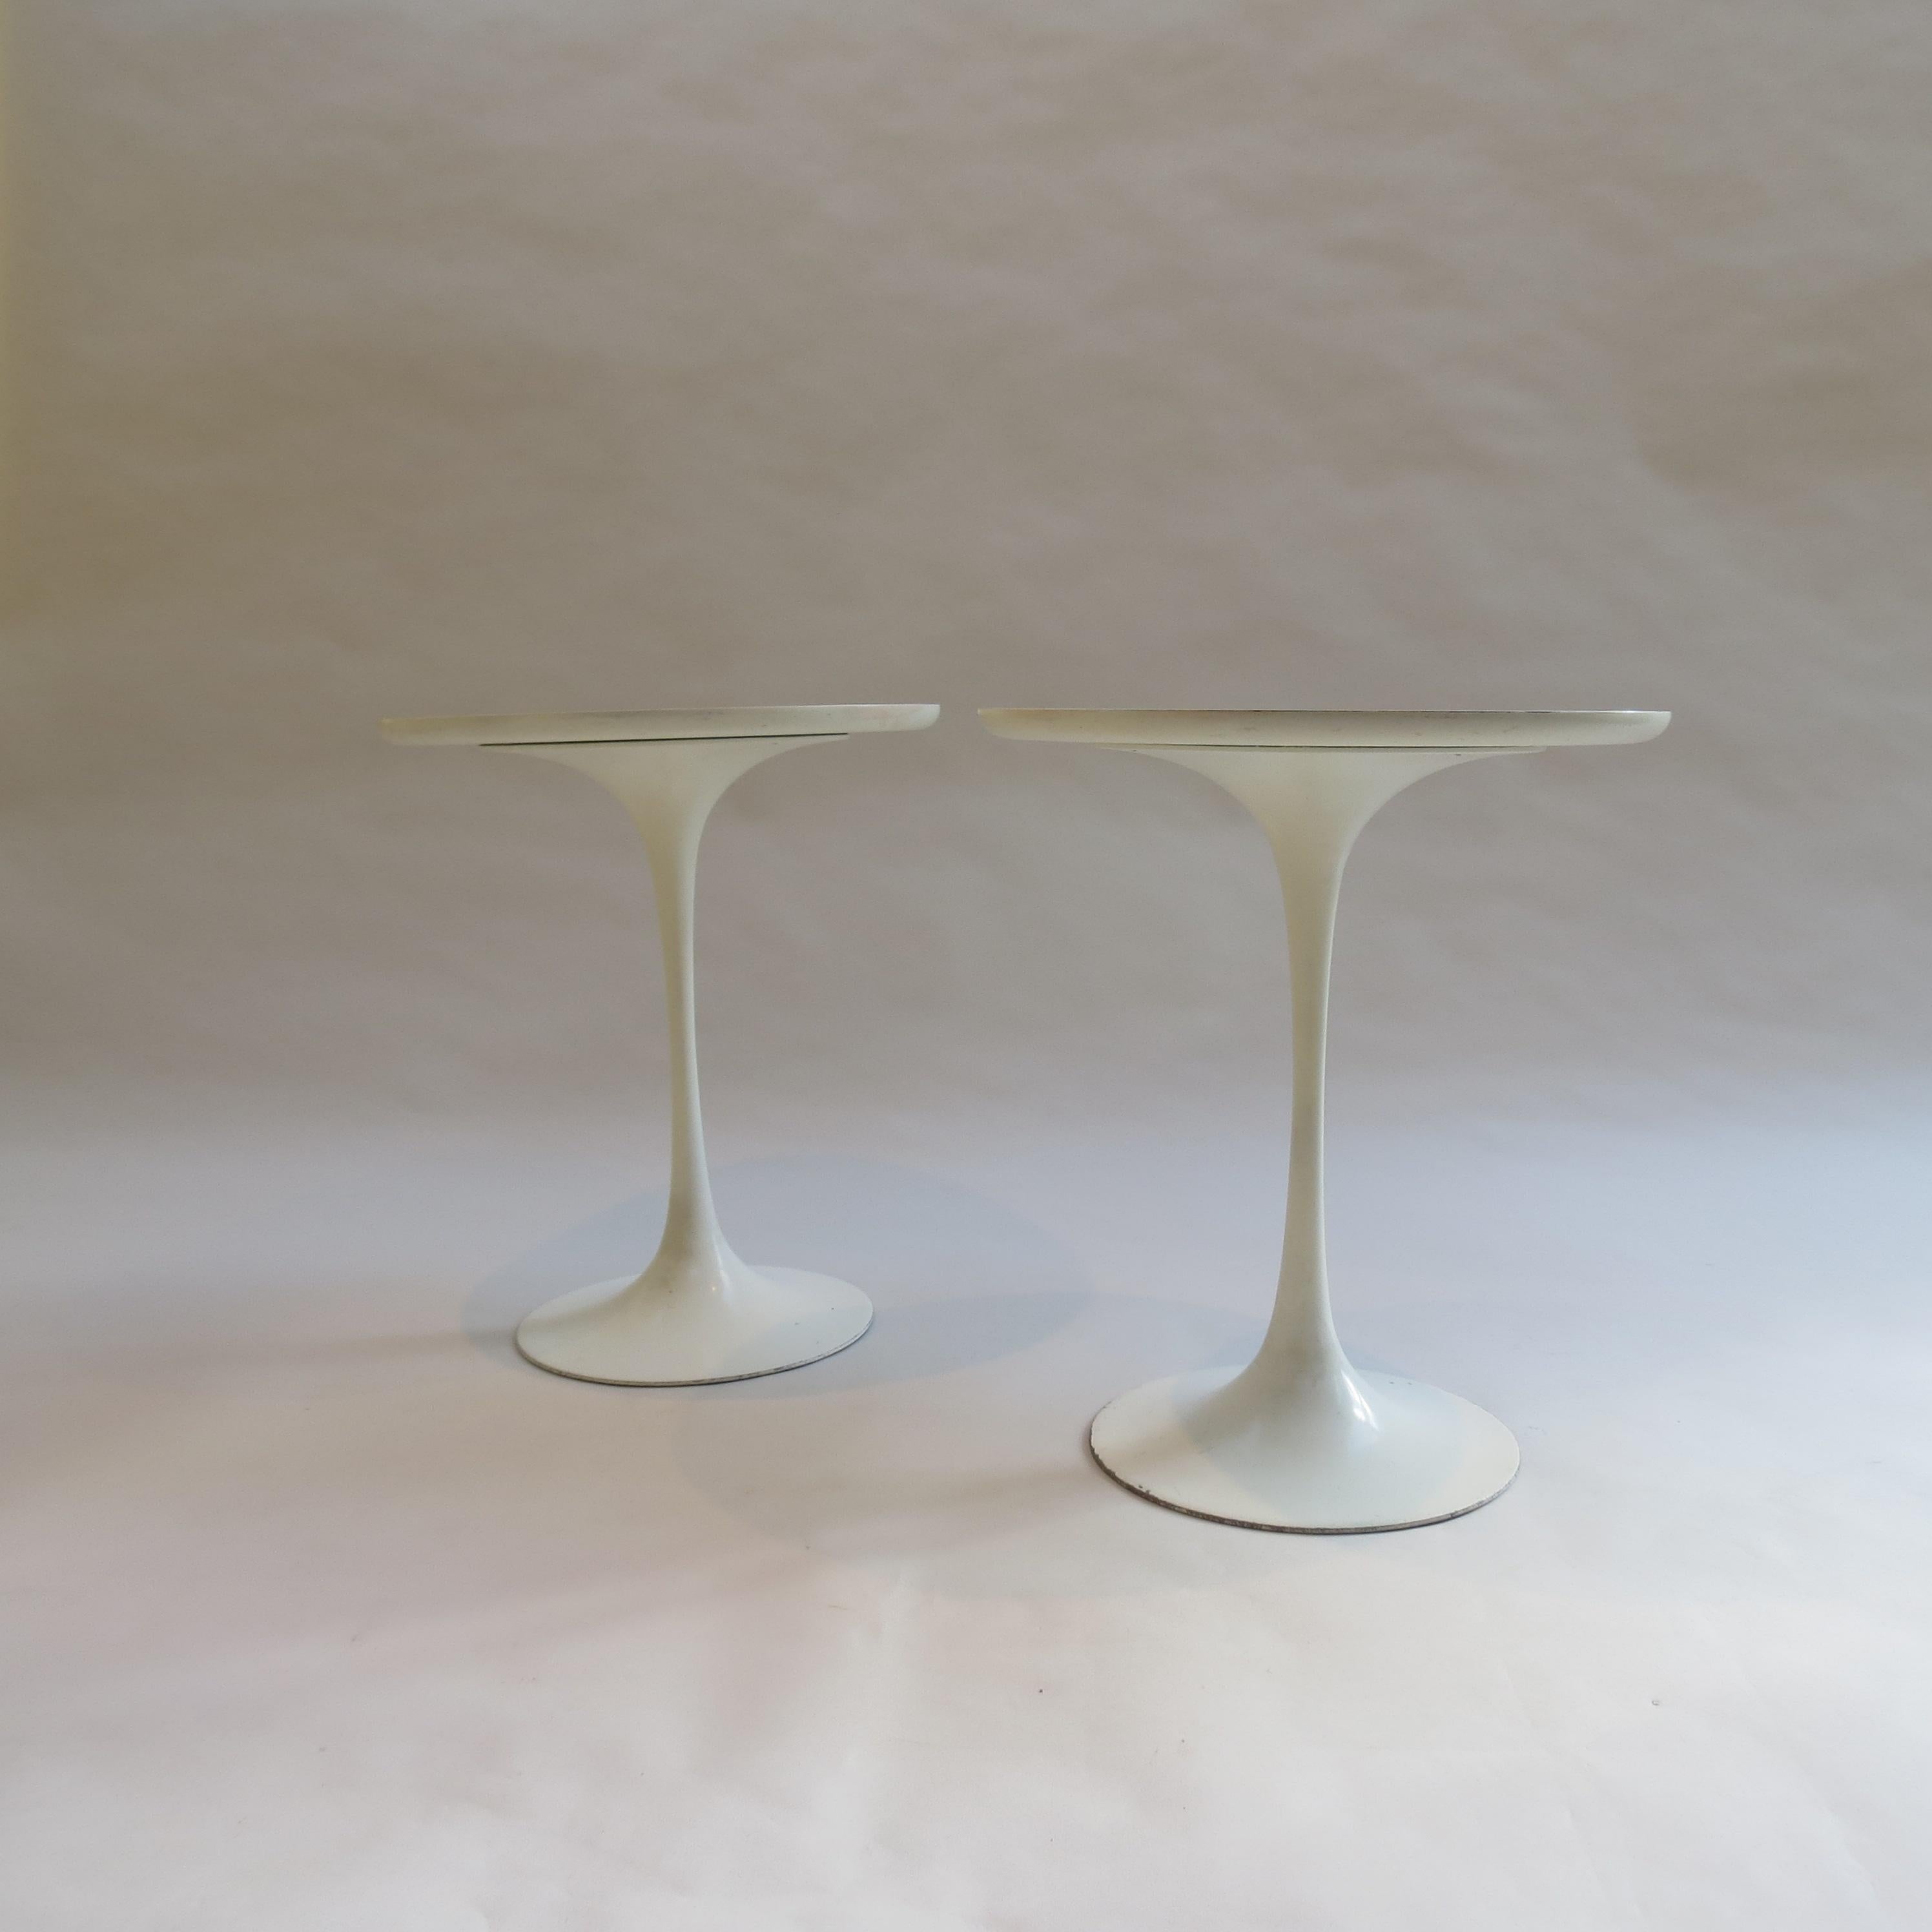 1960s tulip side table designed by Maurice Burke for Arkana, Bath, UK.

Cast aluminium base and circular laminate top.

Some wear and marks to the base. Tops in good condition.

Stamped to underside of base Arkana No 4

2 single tables